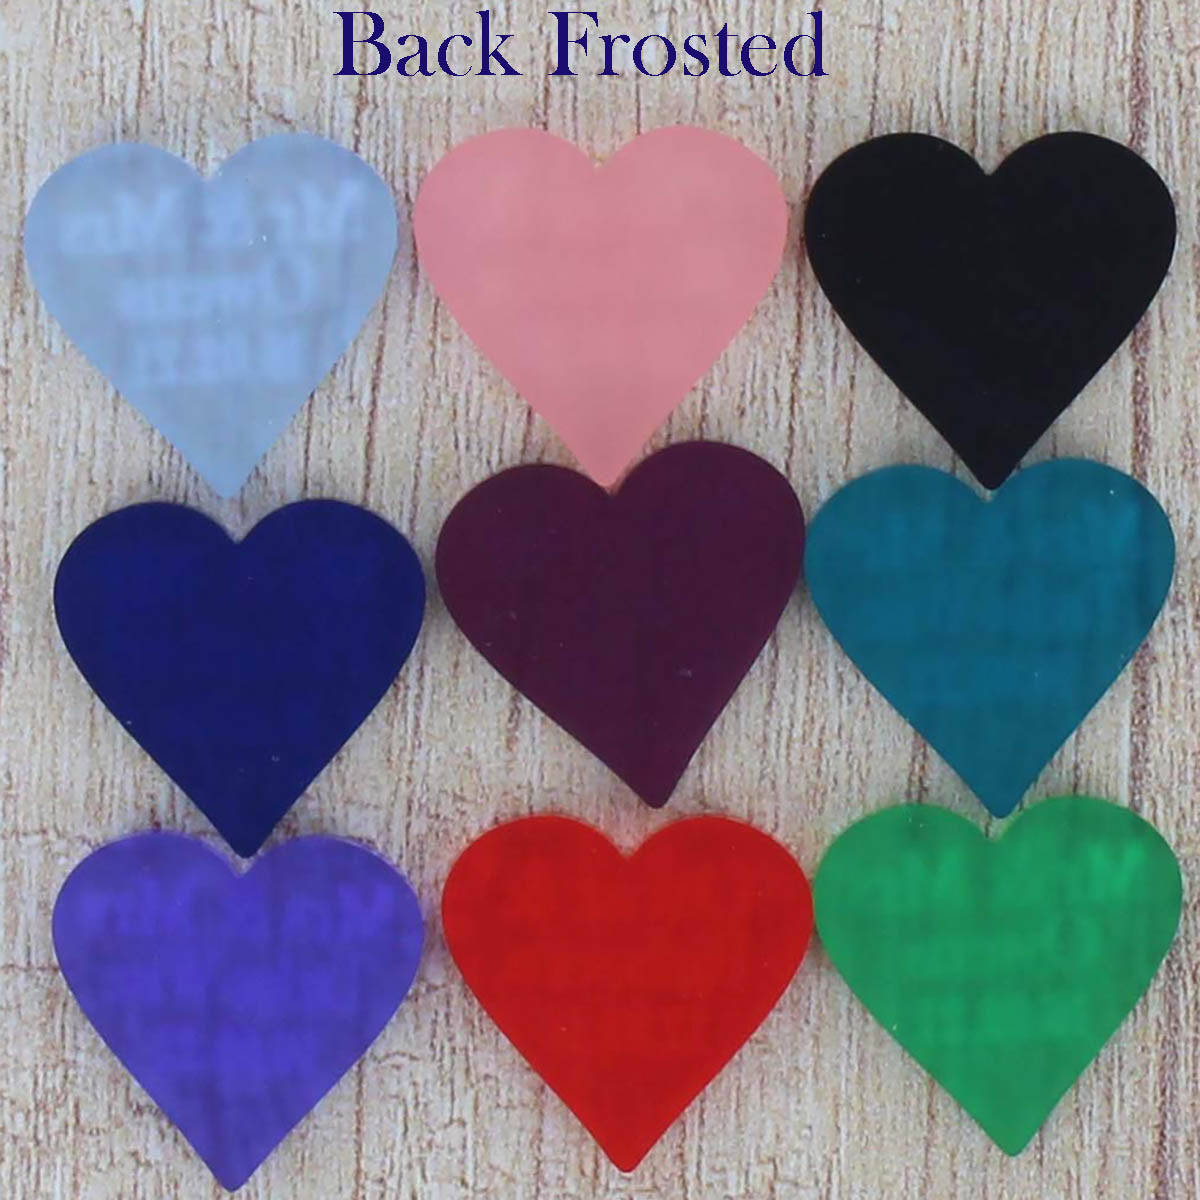 Personalised Wedding Favours - Frosted Black Acrylic Love Hearts